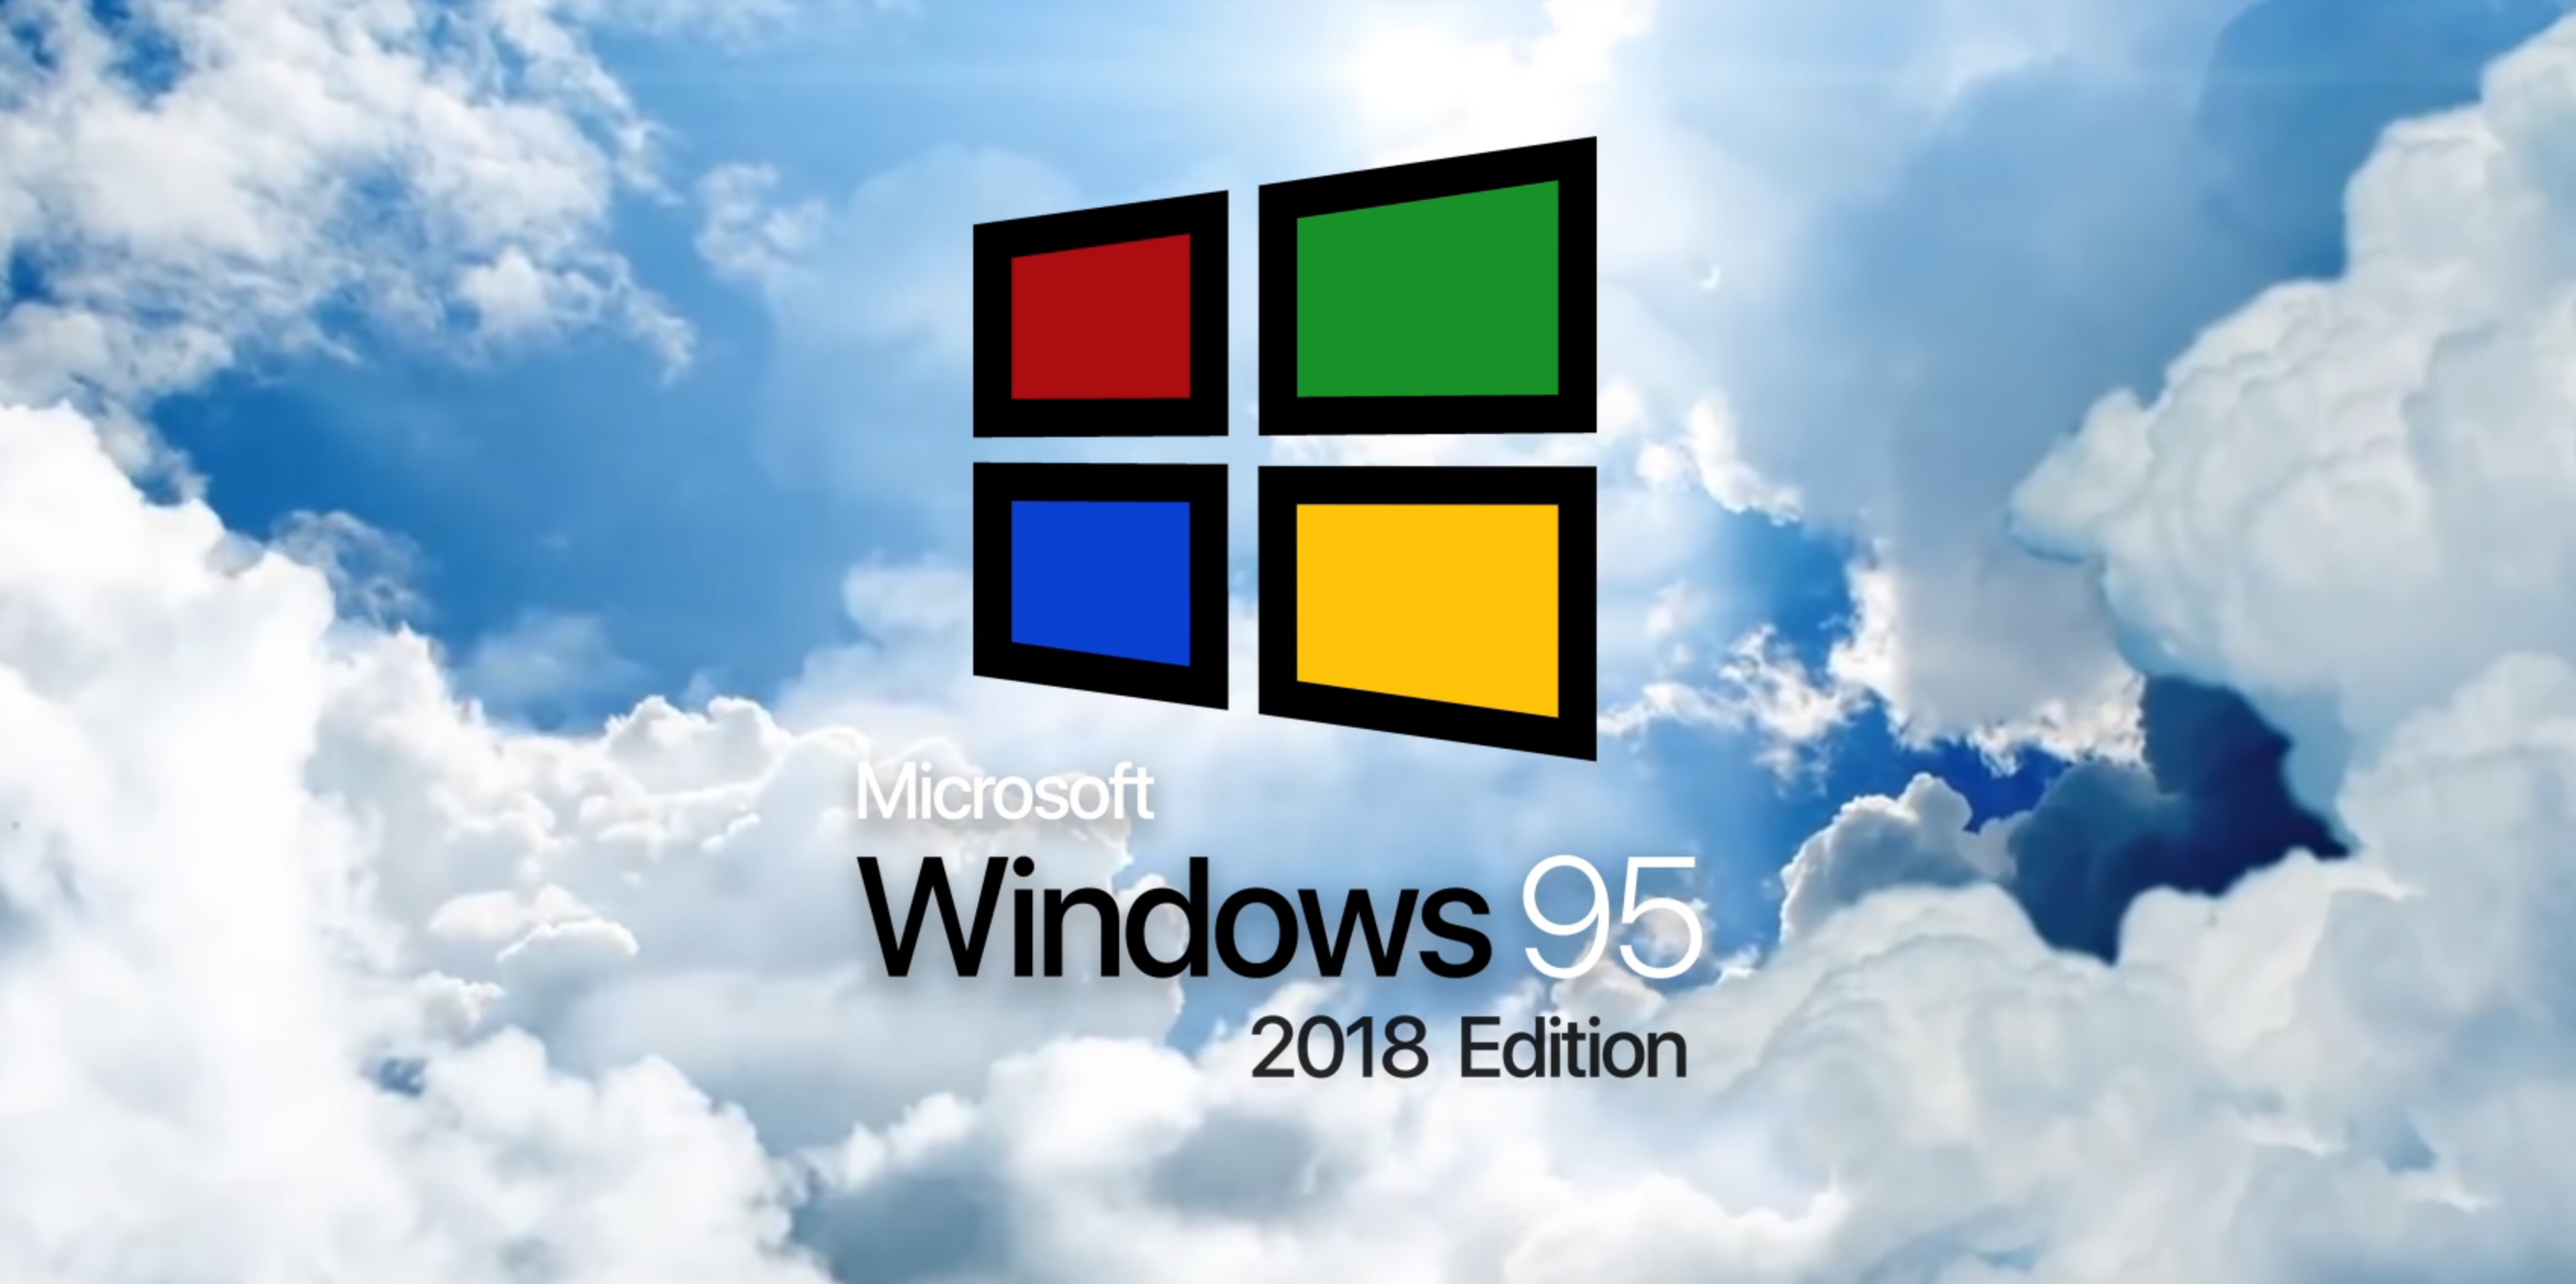 Would you swap Windows 10 for Windows 95 -- 2018 Edition?